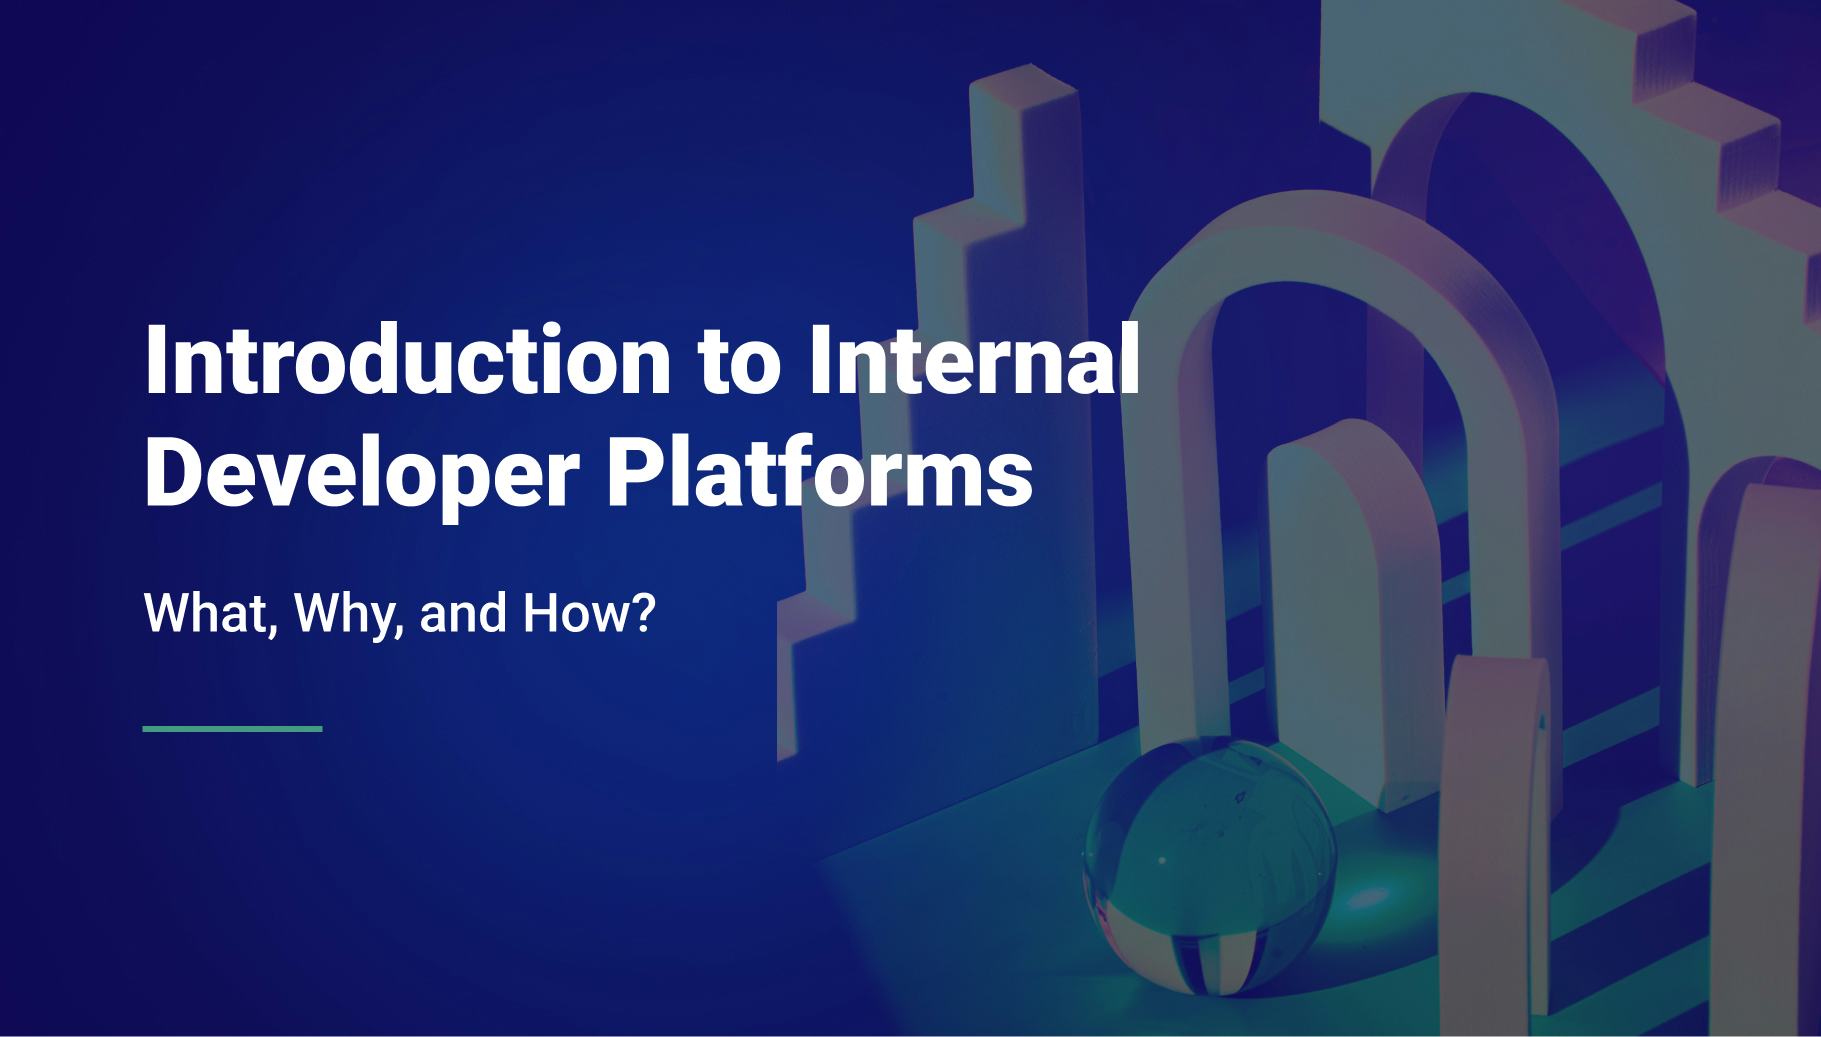 Introduction to Internal Developer Platforms: What, Why, and How? - Qovery